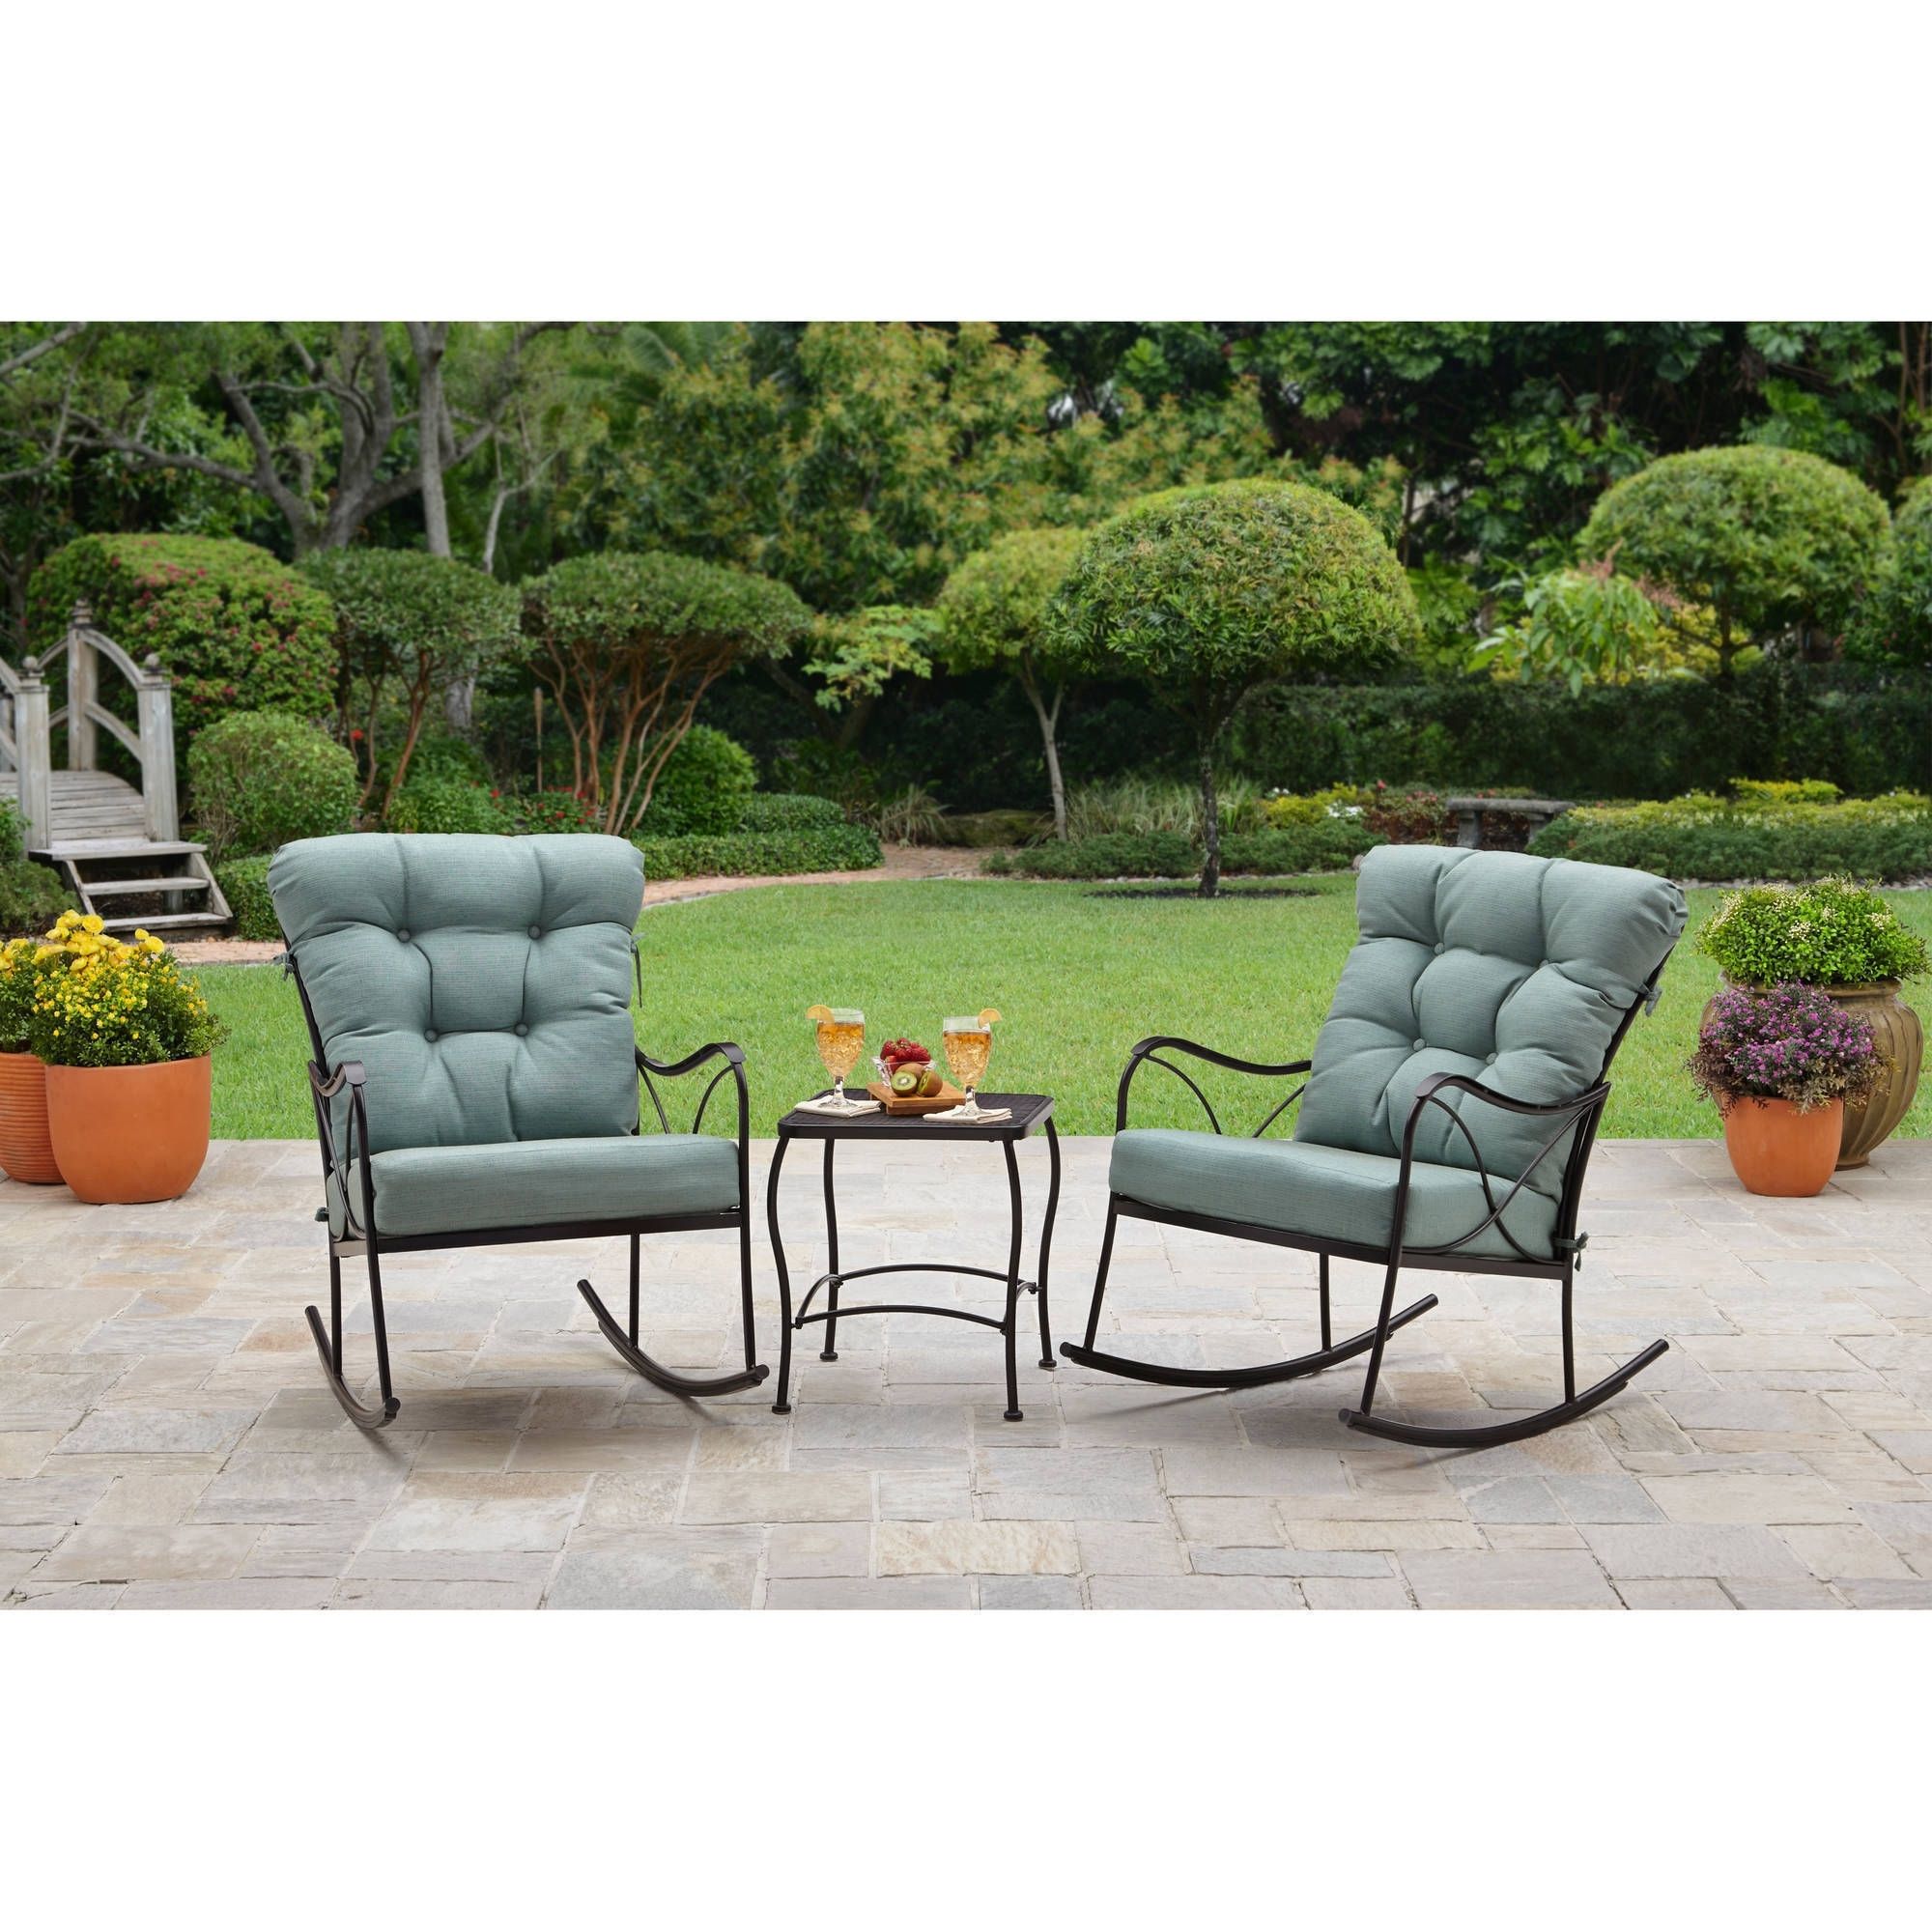 Better Homes And Gardens Seacliff 3 Piece Rocking Chair Bistro Set Pertaining To 2017 Patio Rocking Chairs Sets (Photo 9 of 15)